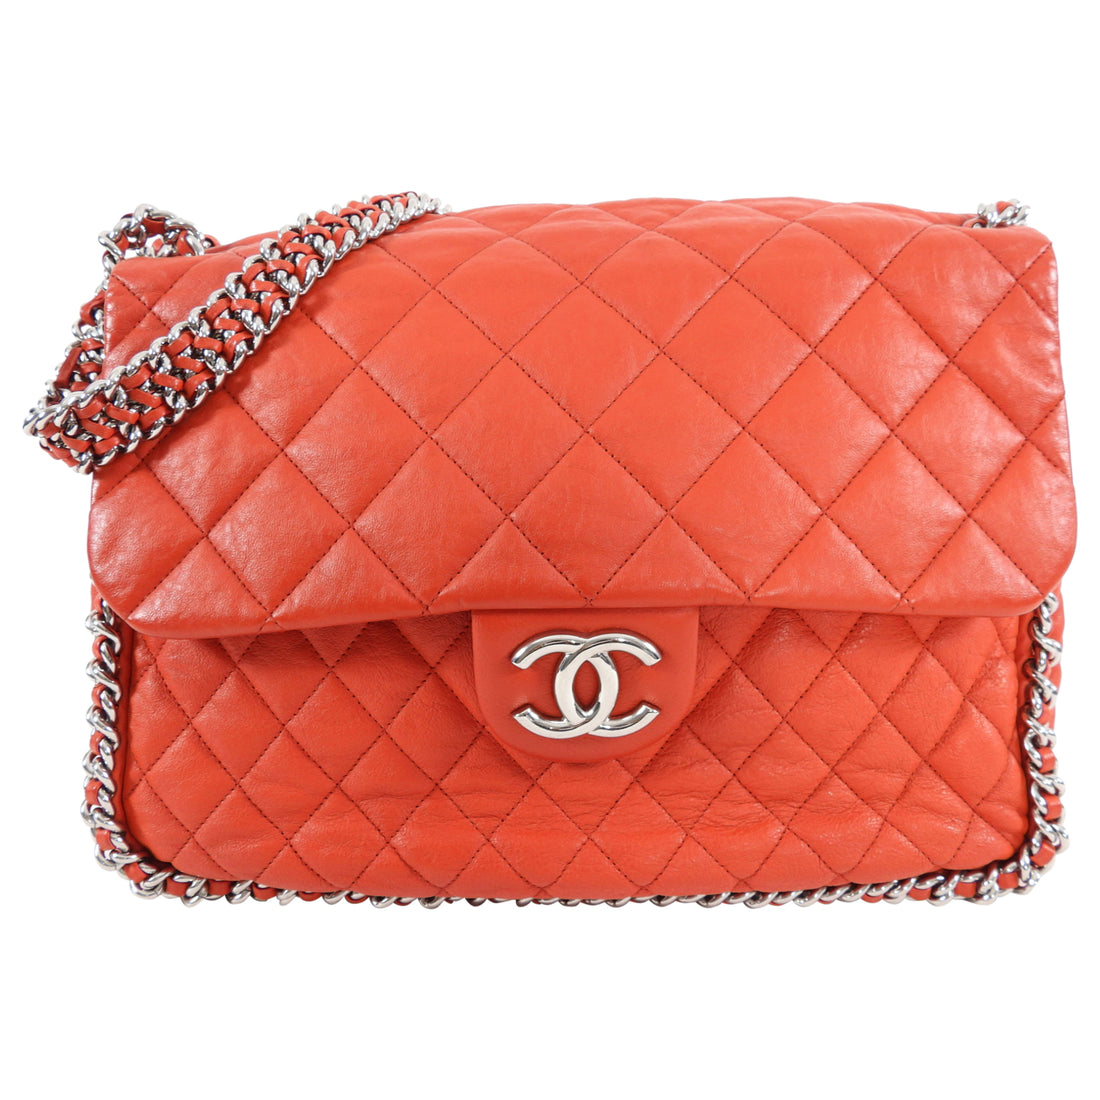 Chanel Red French Riviera Flap Bag  Trường THPT Anhxtanh